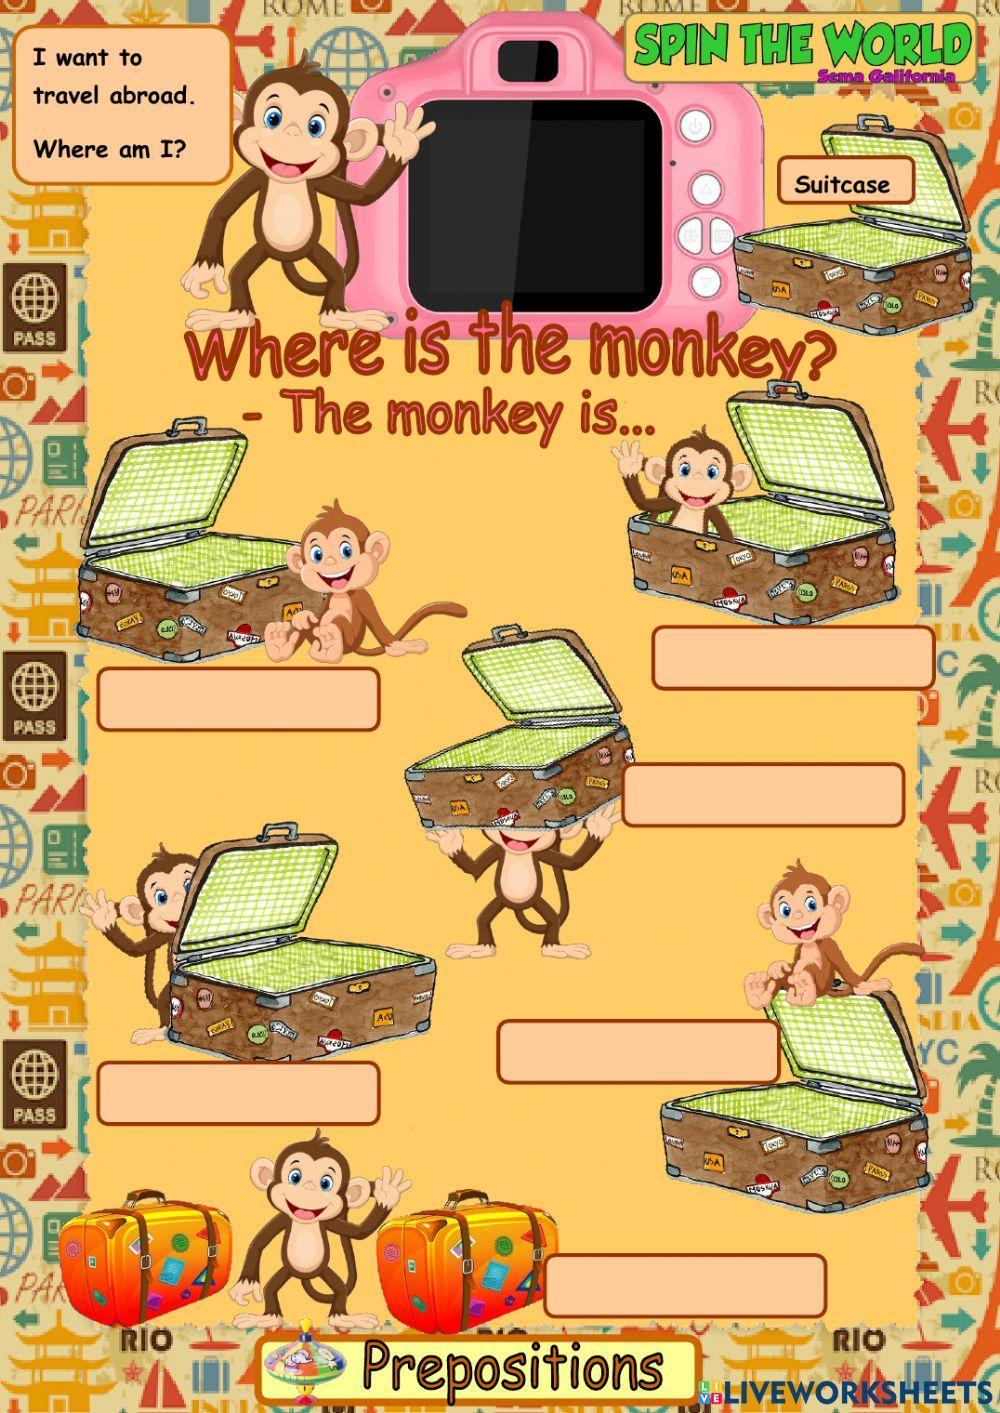 Where is the monkey?